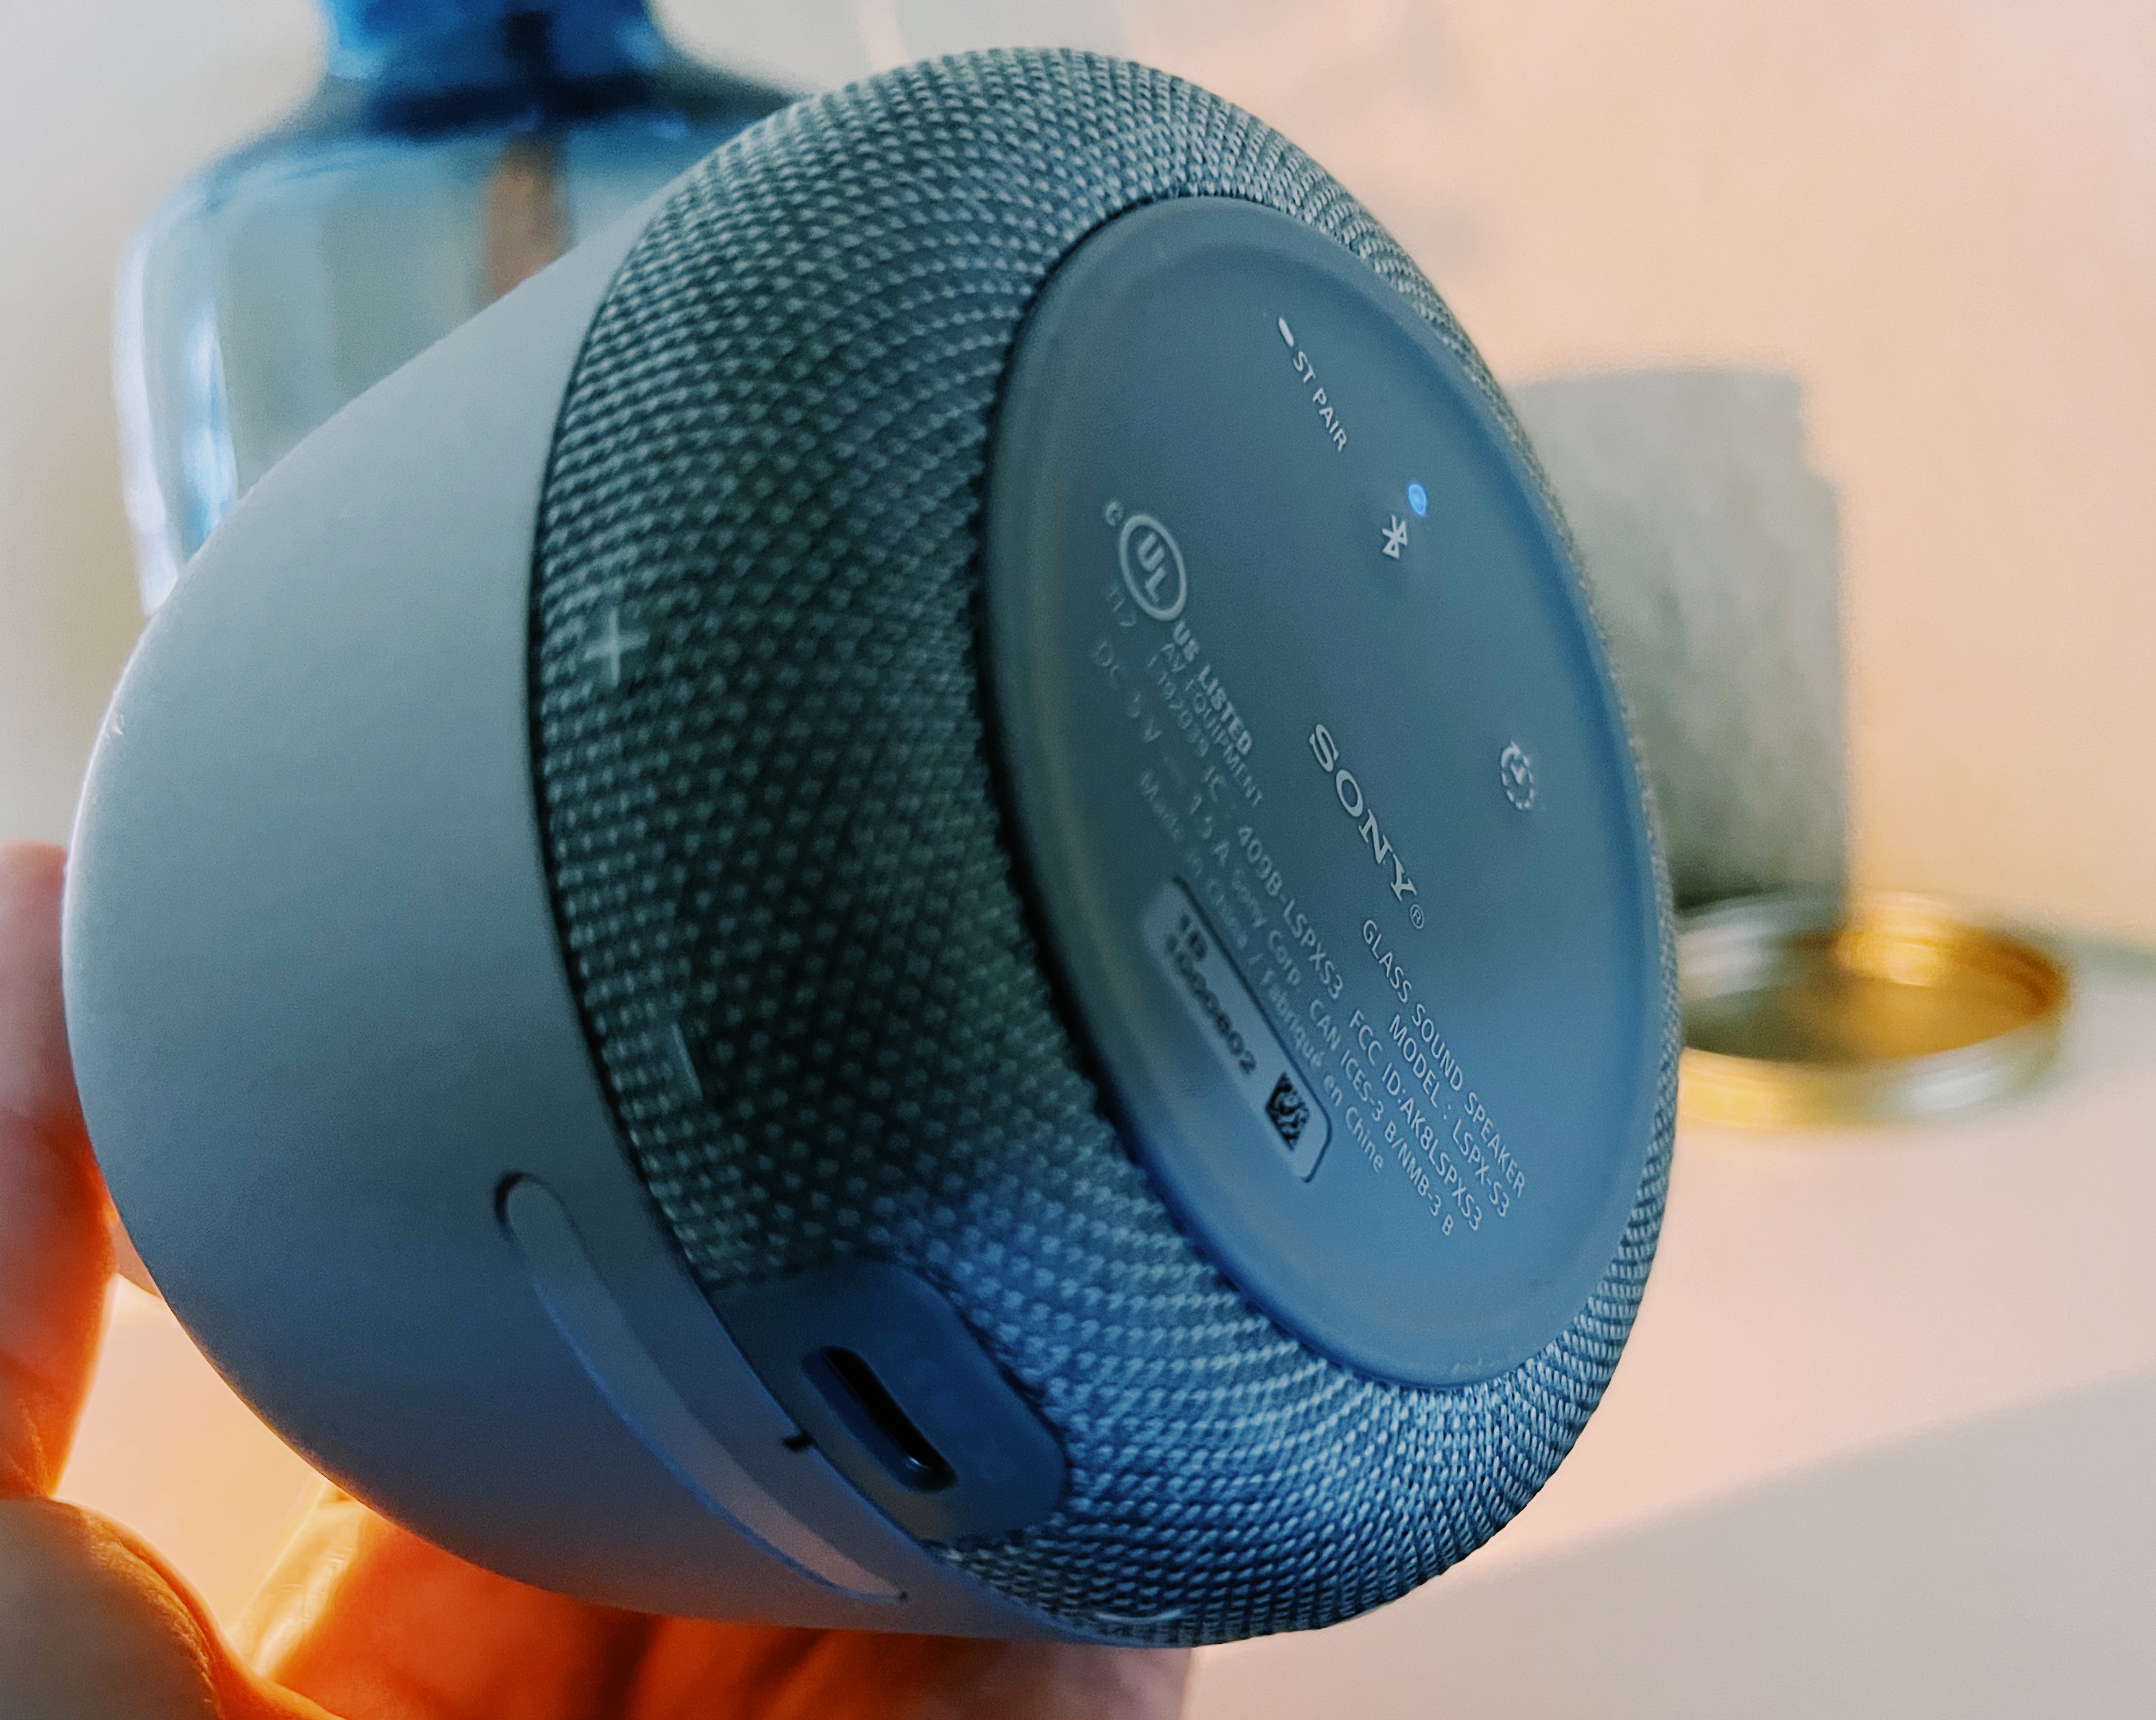 Sony's LSPX-S3 Glass Sound Speaker Is Funky and Fun, but Not for You